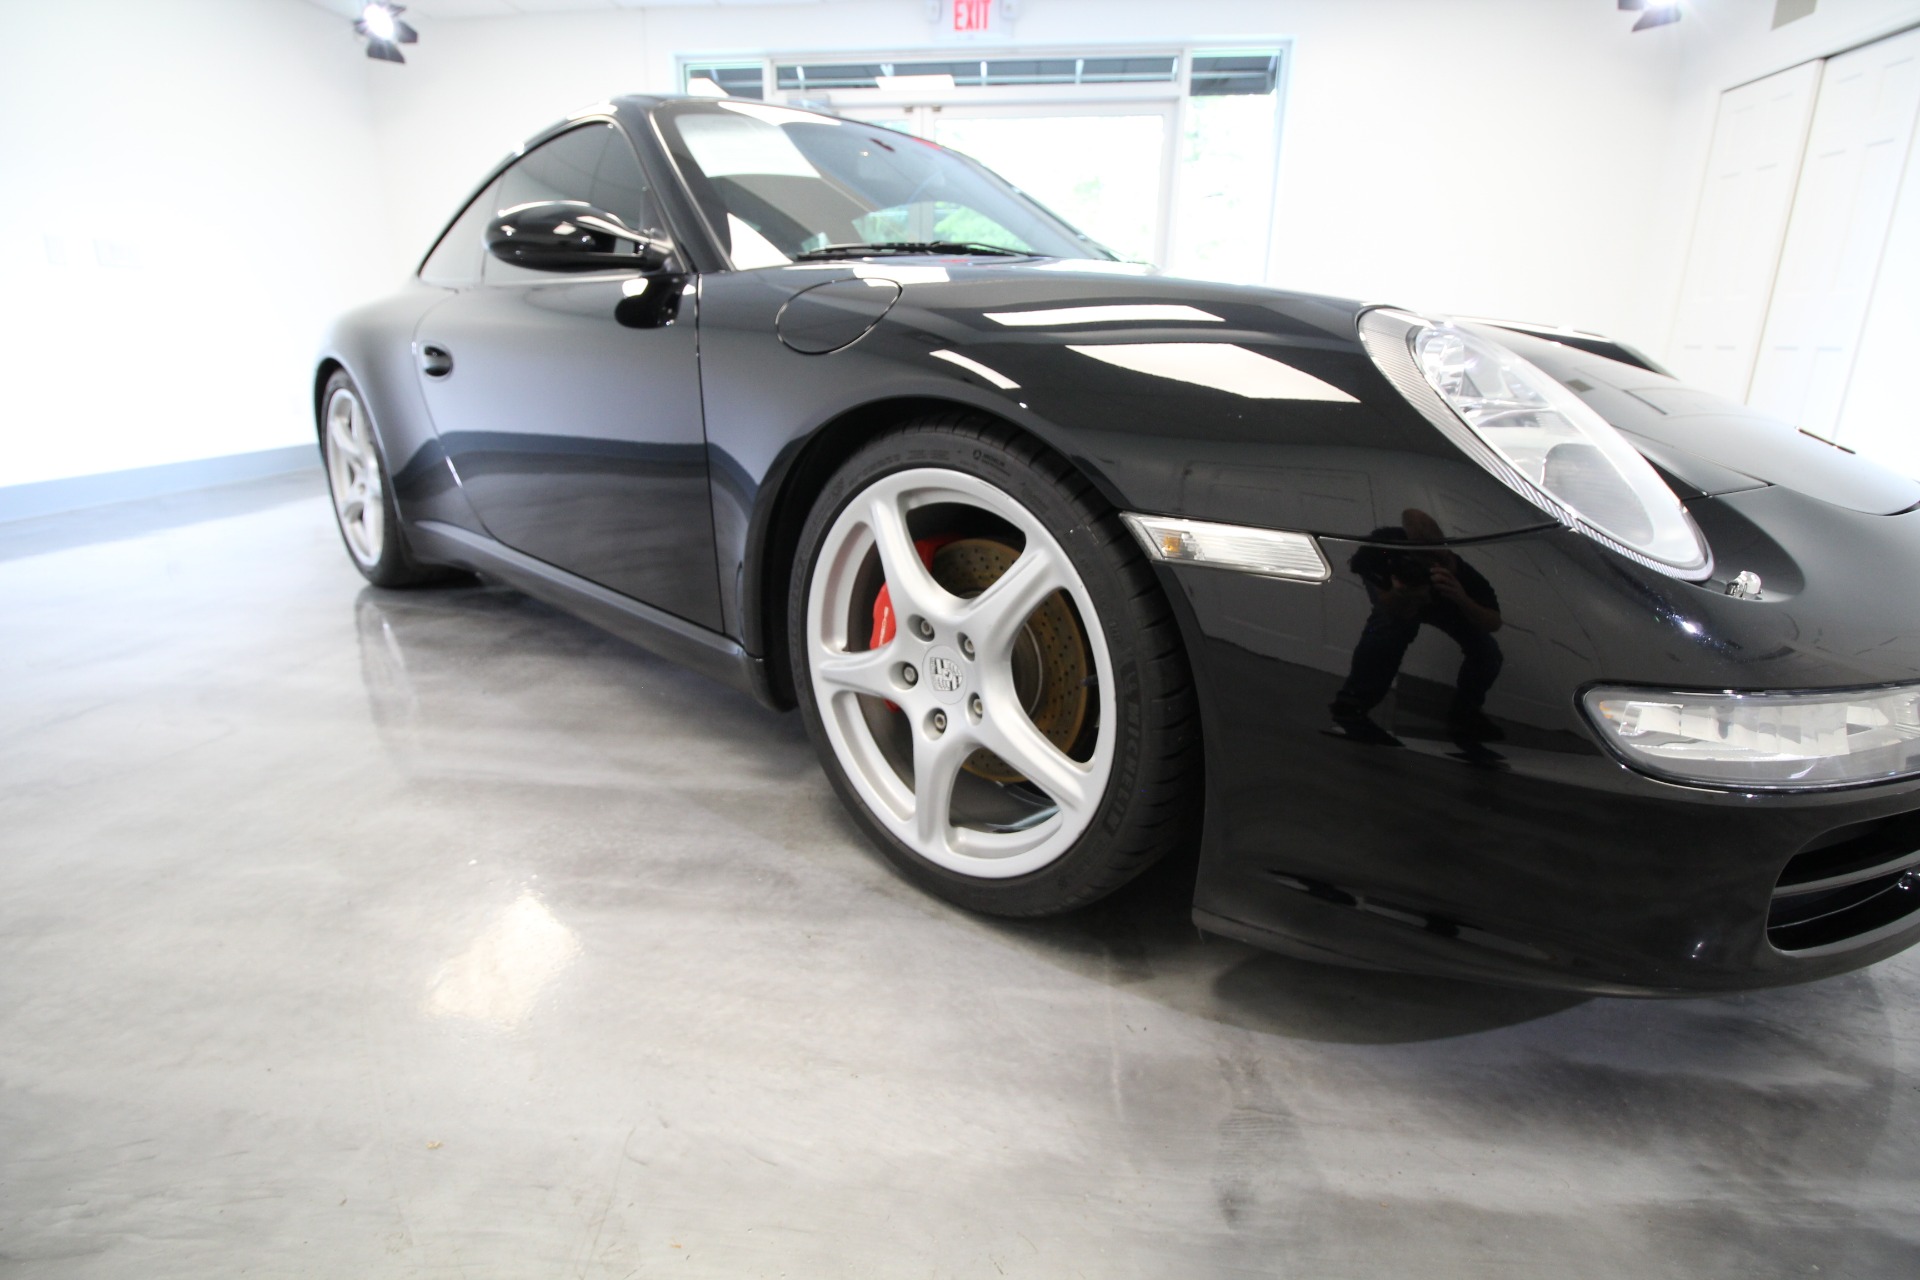 Used 2006 Black Porsche 911 Carrera S RARE 6 SPEED MANUAL NEW IMS AND CLUTCH IN 17 | Albany, NY